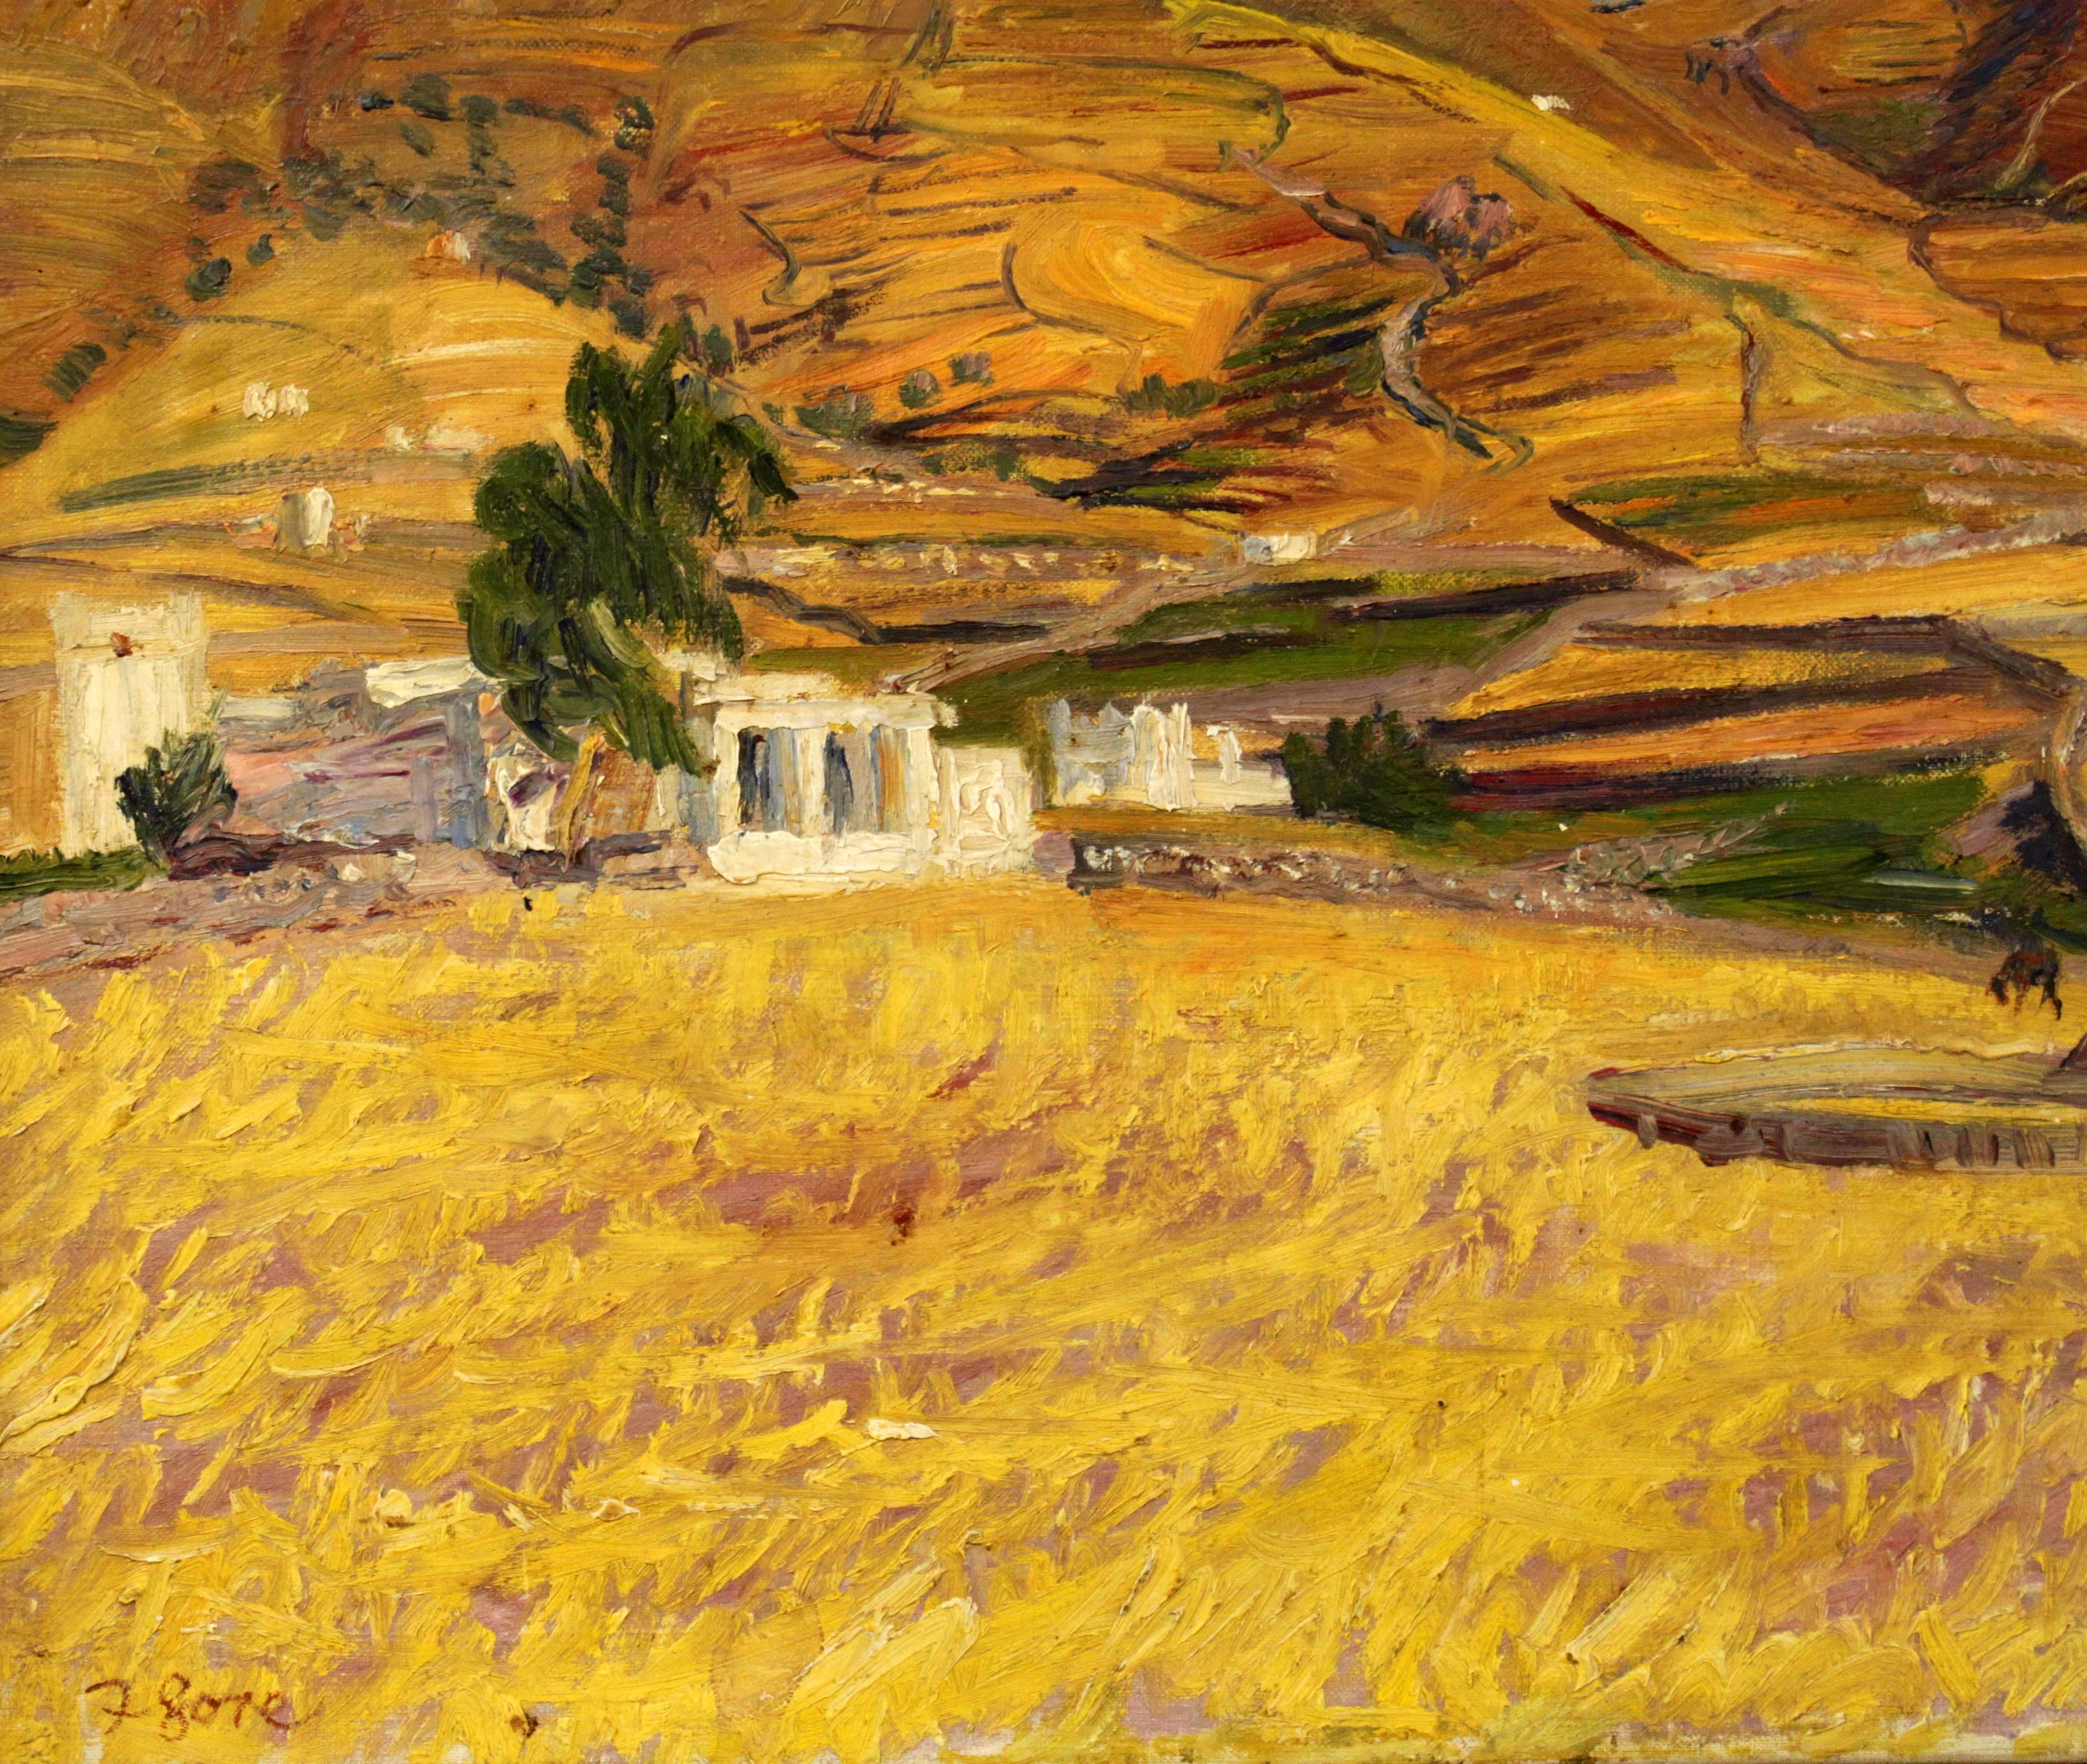 British Landscape Oil Painting of Greek City Paros, by Frederick Gore